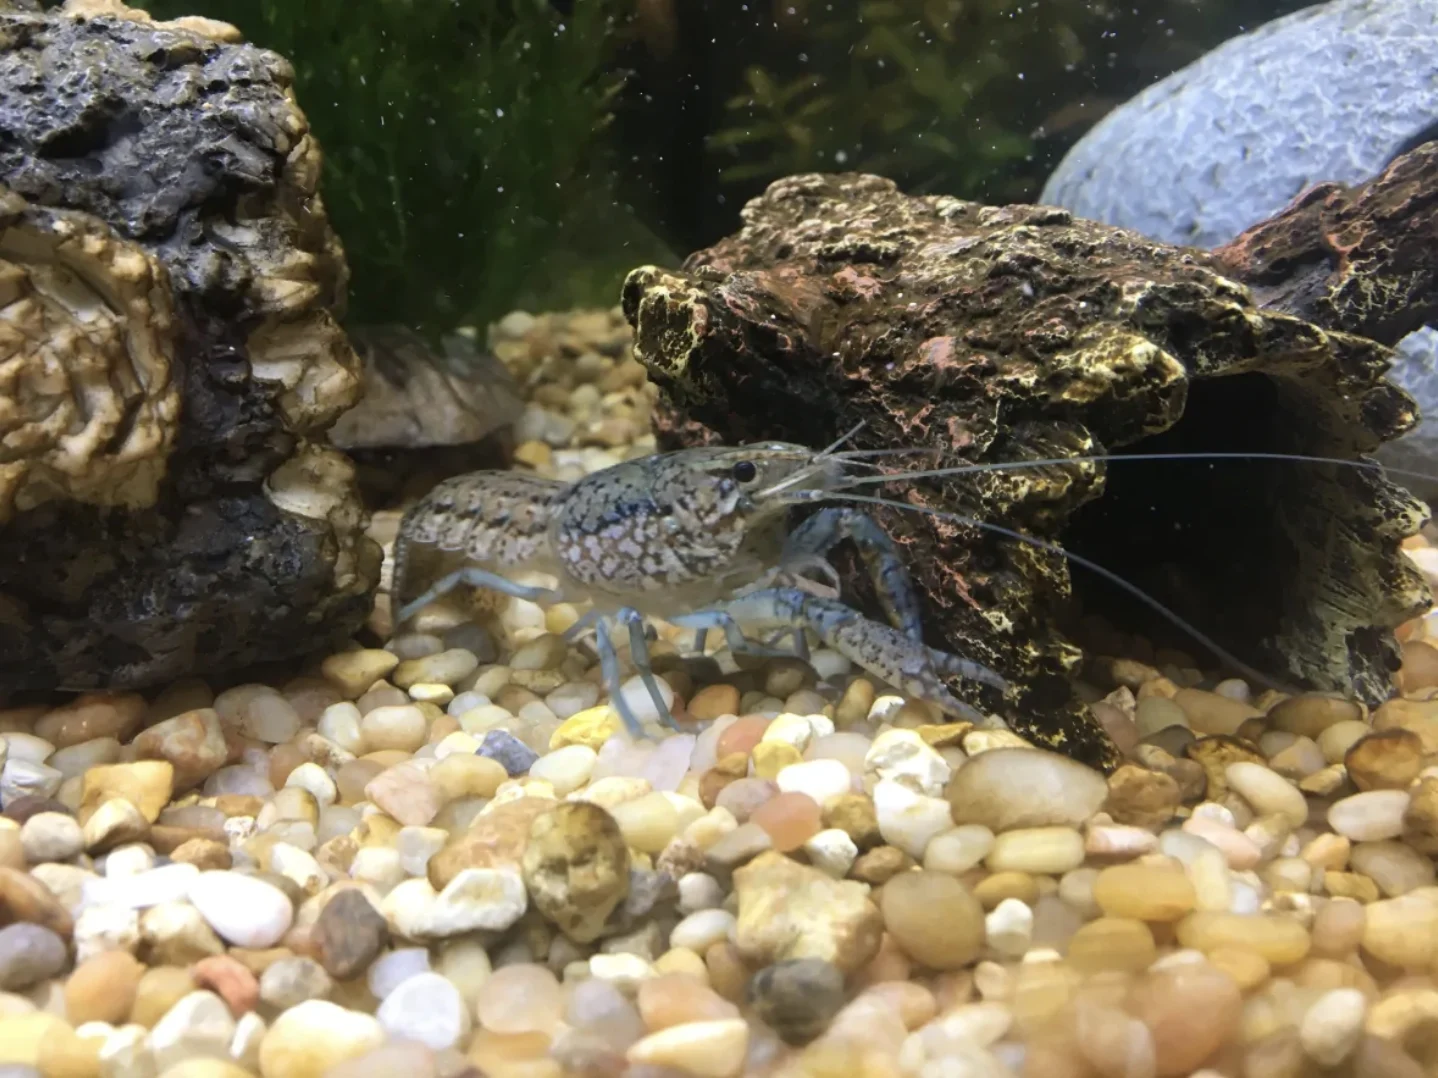 cbc: Crayfish have been spotted in rivers and lakes throughout Alberta, says Alberta Environment and Parks. (Submitted by Nicole Kimmel)